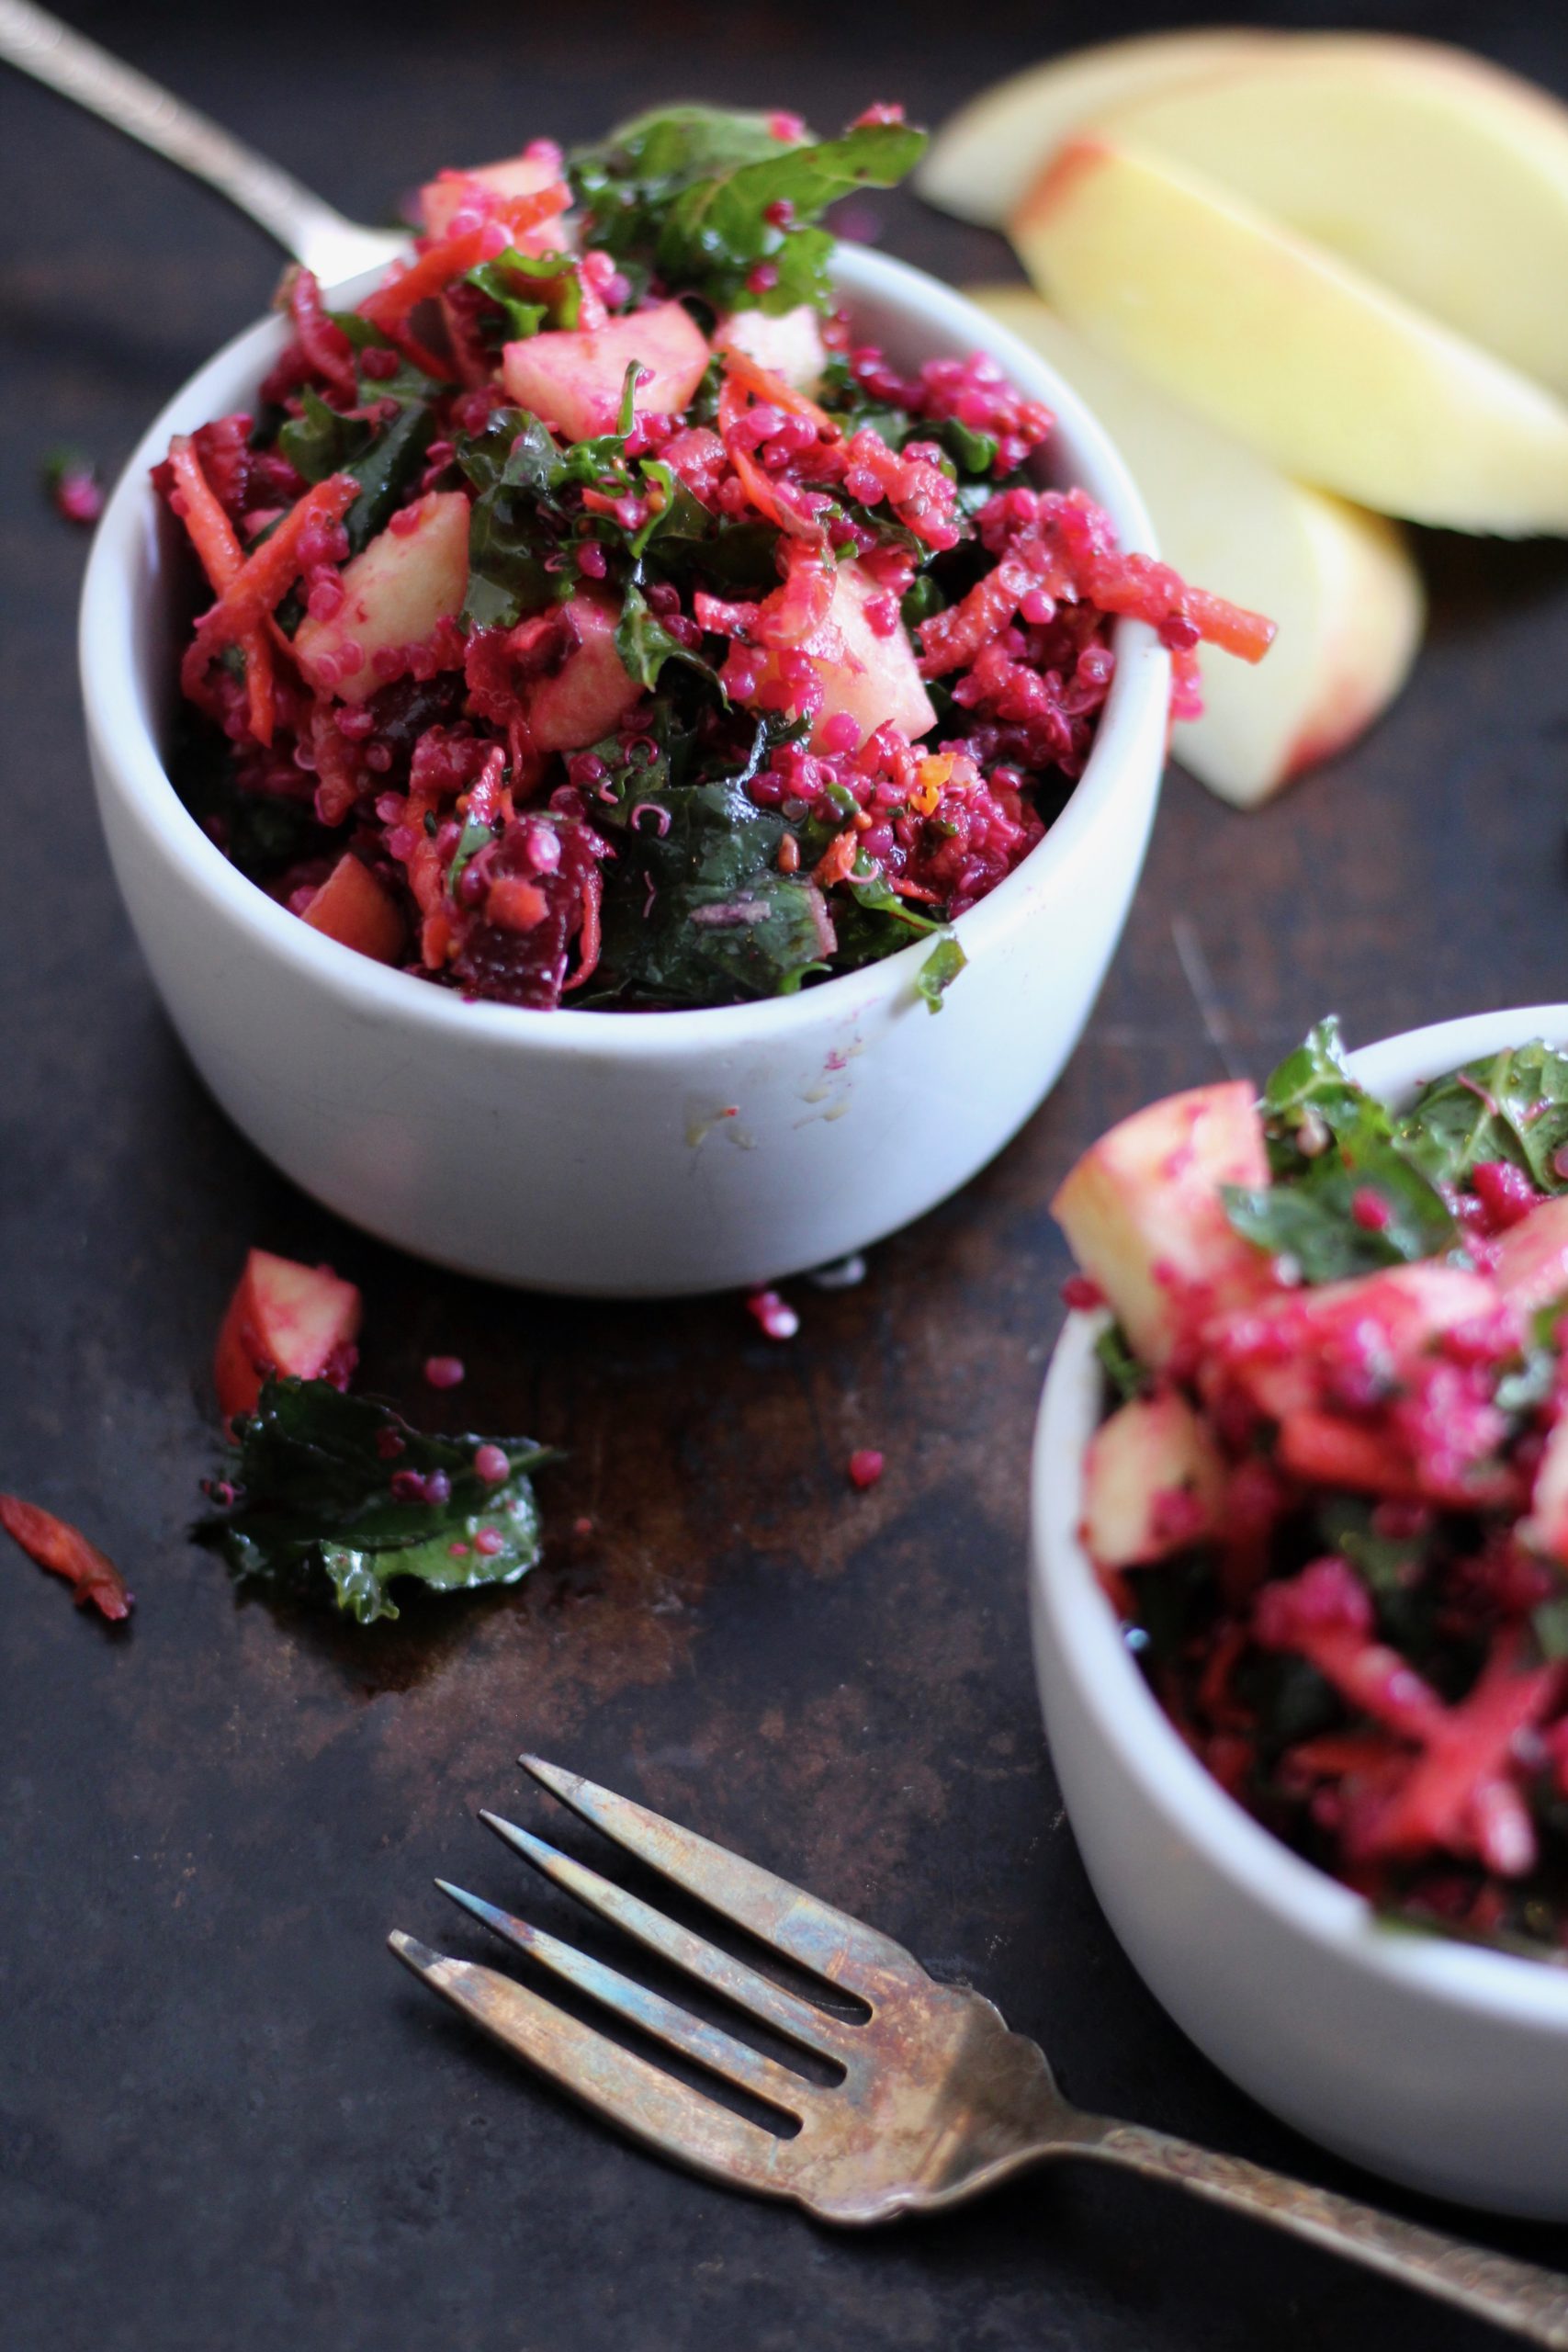 kale salad with apples beets and carrots